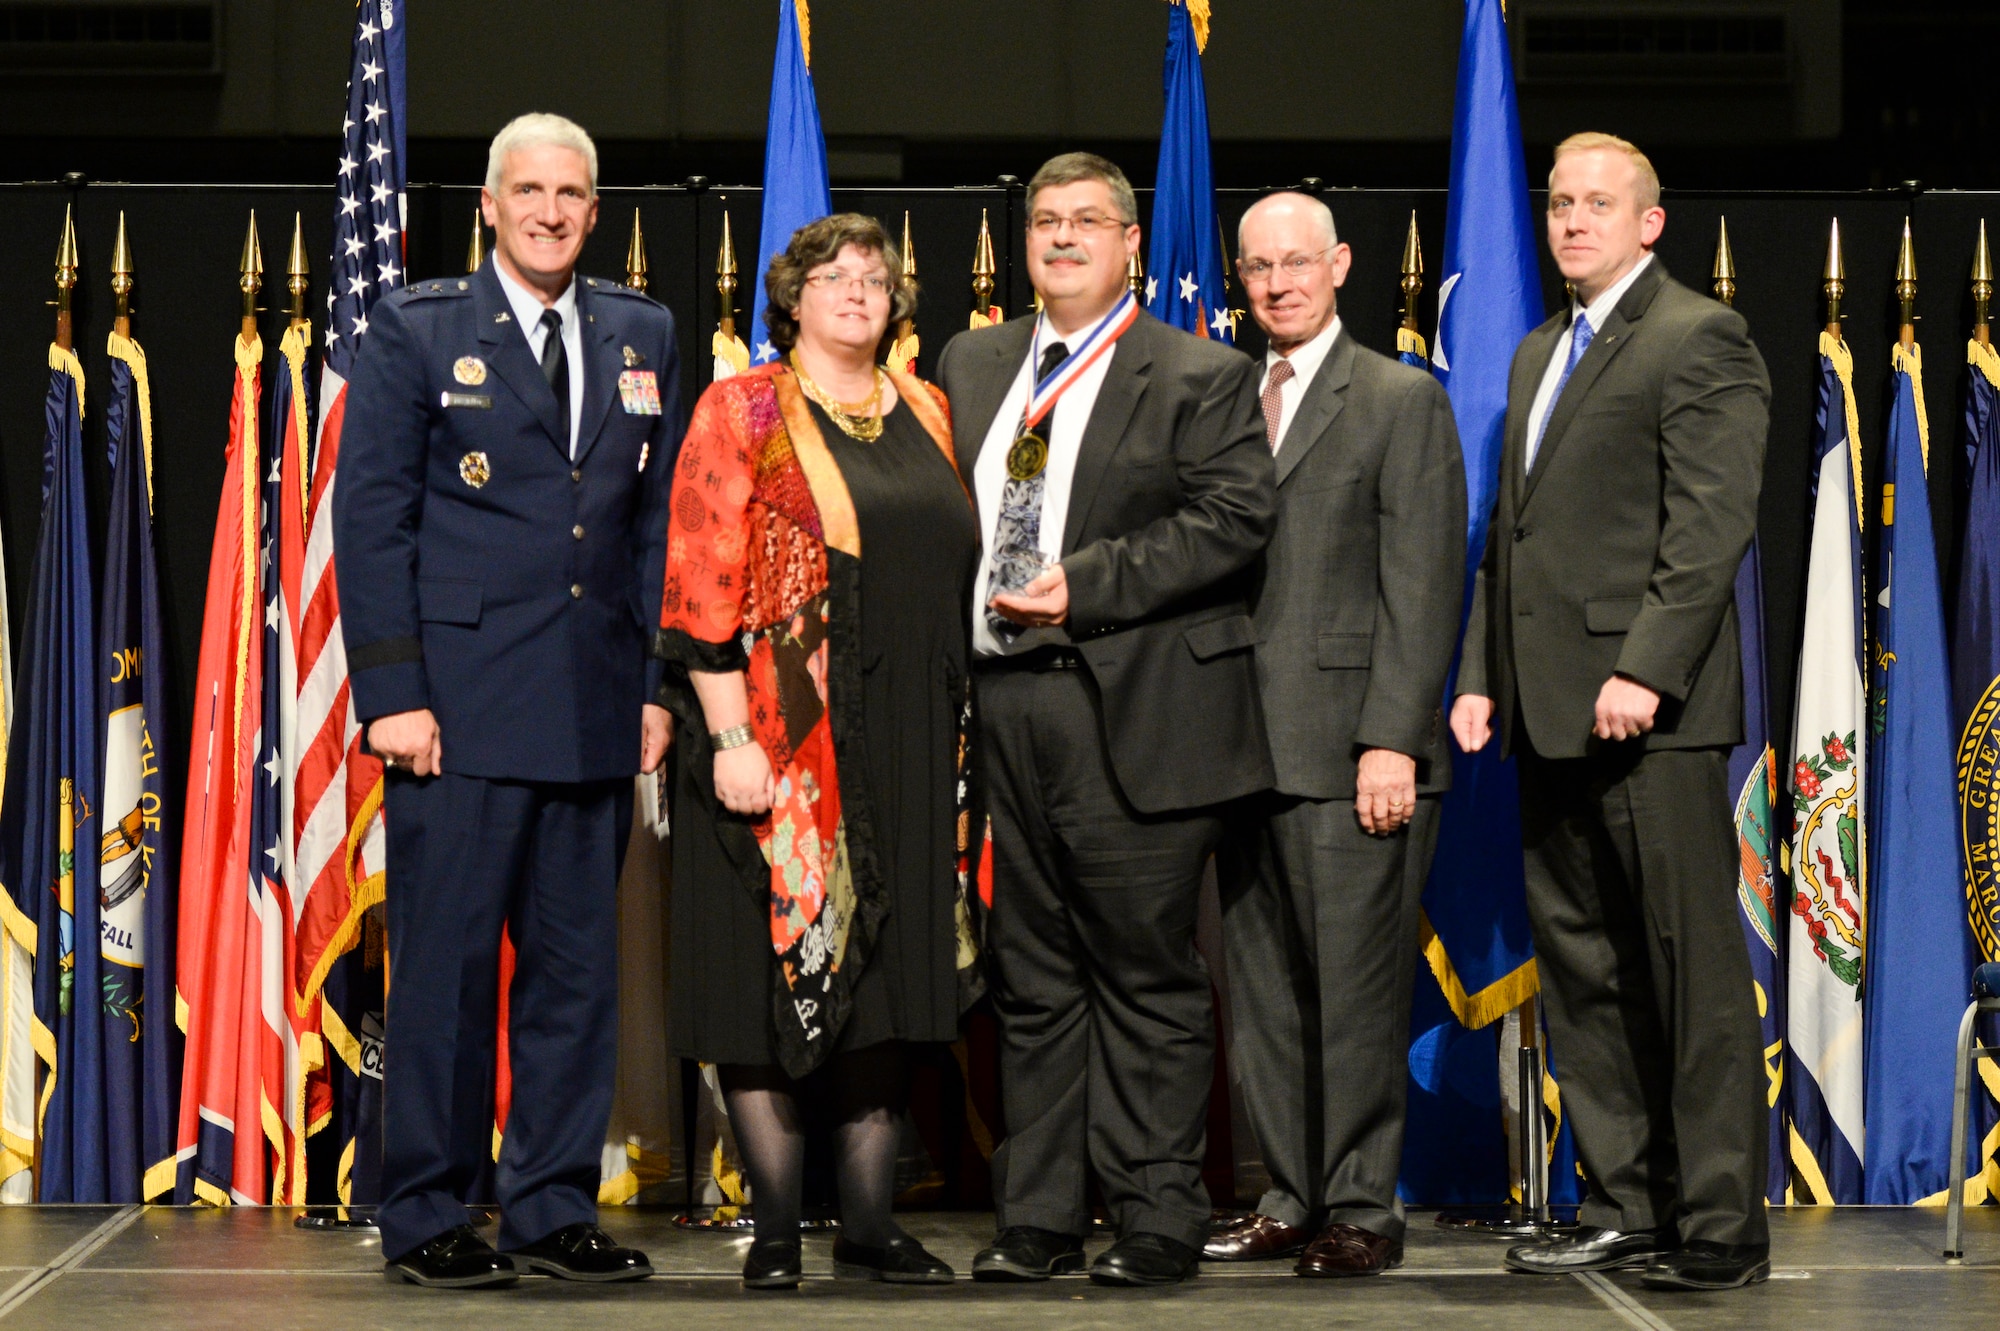 Dr. Charles Cross, chief, Turbine Engine Division, Air Force Research Laboratory Aerospace Systems Directorate, and his wife Kerrie, are honored during the 2014 AFRL Fellows and Early Career Awards Banquet, Oct. 30 at the National Museum of the U.S. Air Force. Joining them are Maj. Gen Tom Masiello, AFRL commander, Maj. Gen. Dick Paul, AFRL's first commander, and Dr. Morley Stone, AFRL chief technology officer.  (U.S. Air Force photo/Wesley Farnsworth)